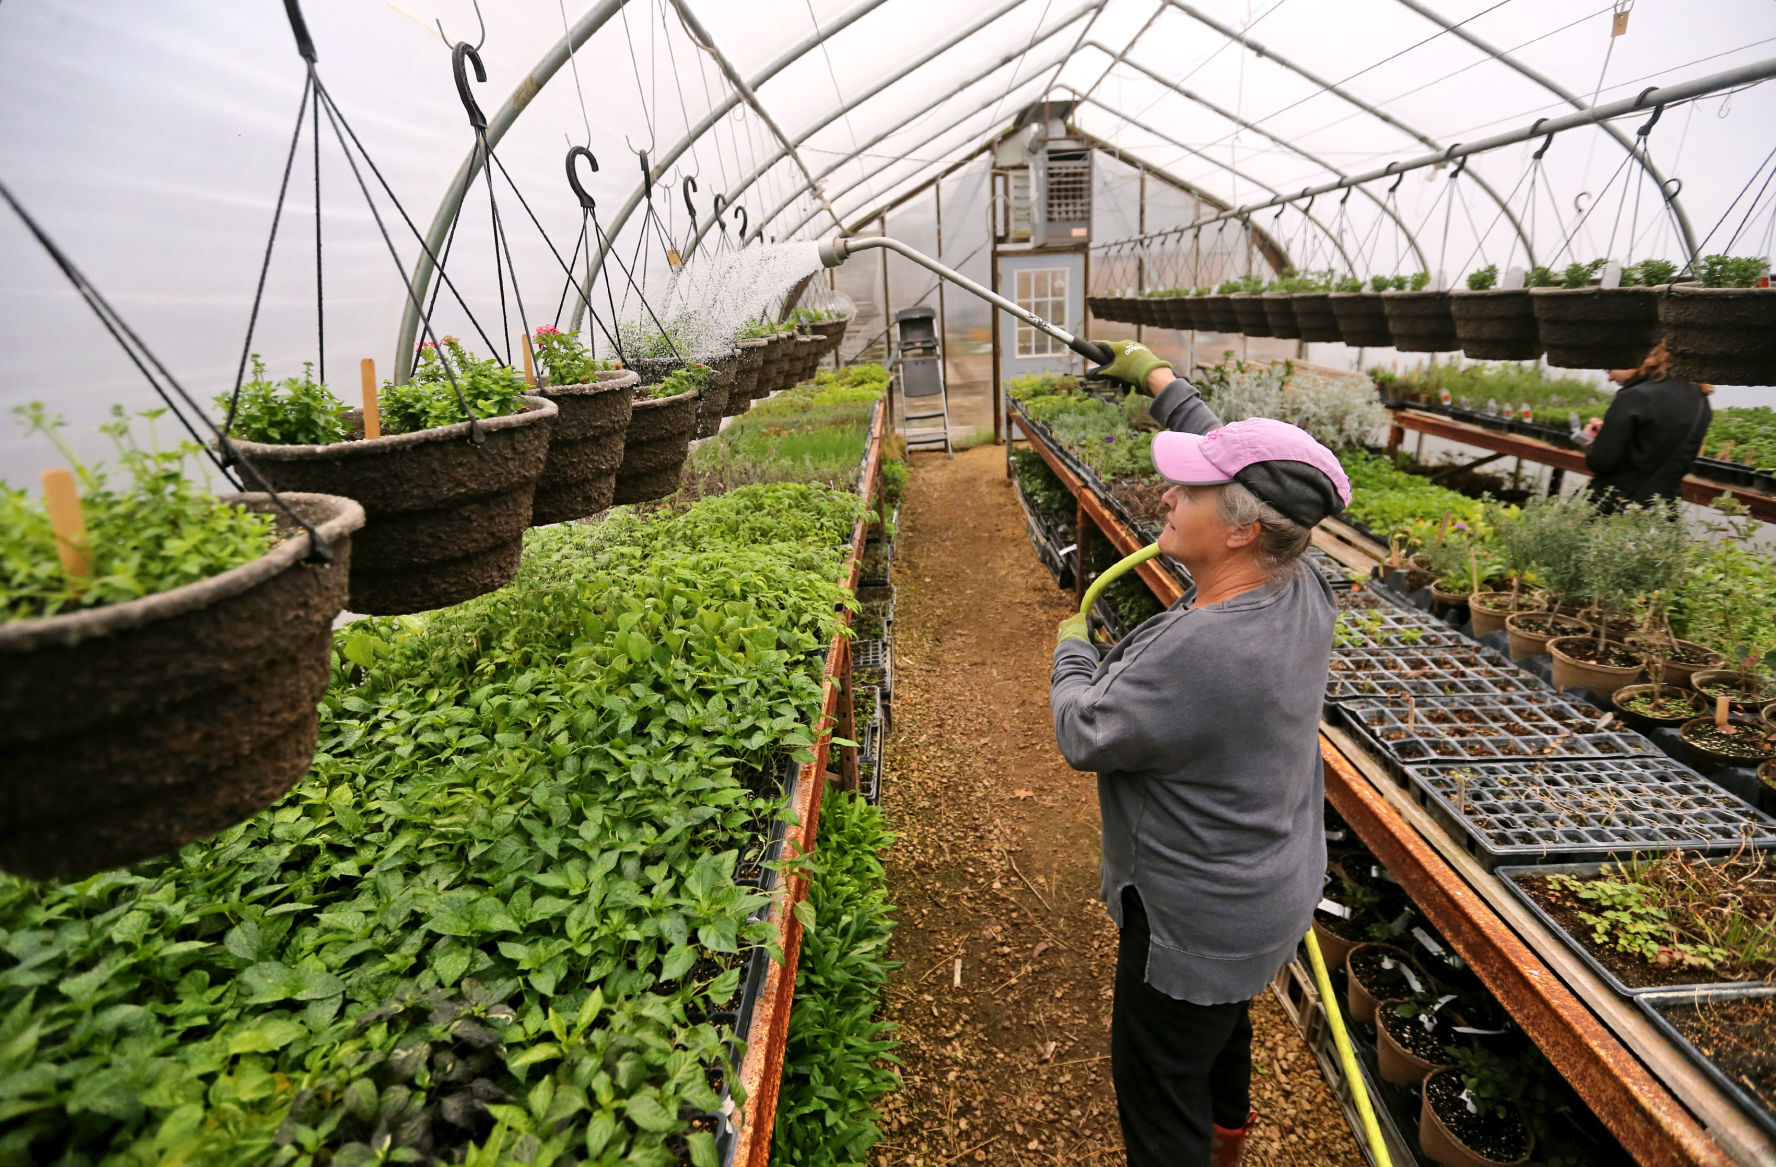 Sheila “Dobie” Merfeld waters plants at Dobie’s Flowers & Produce in Durango, Iowa. The family business has a nearly 30-year connection to farmers markets in the tri-states. It offers numerous items, including vegetables, herbs, eggs, flowers and starter plants.    PHOTO CREDIT: JESSICA REILLY